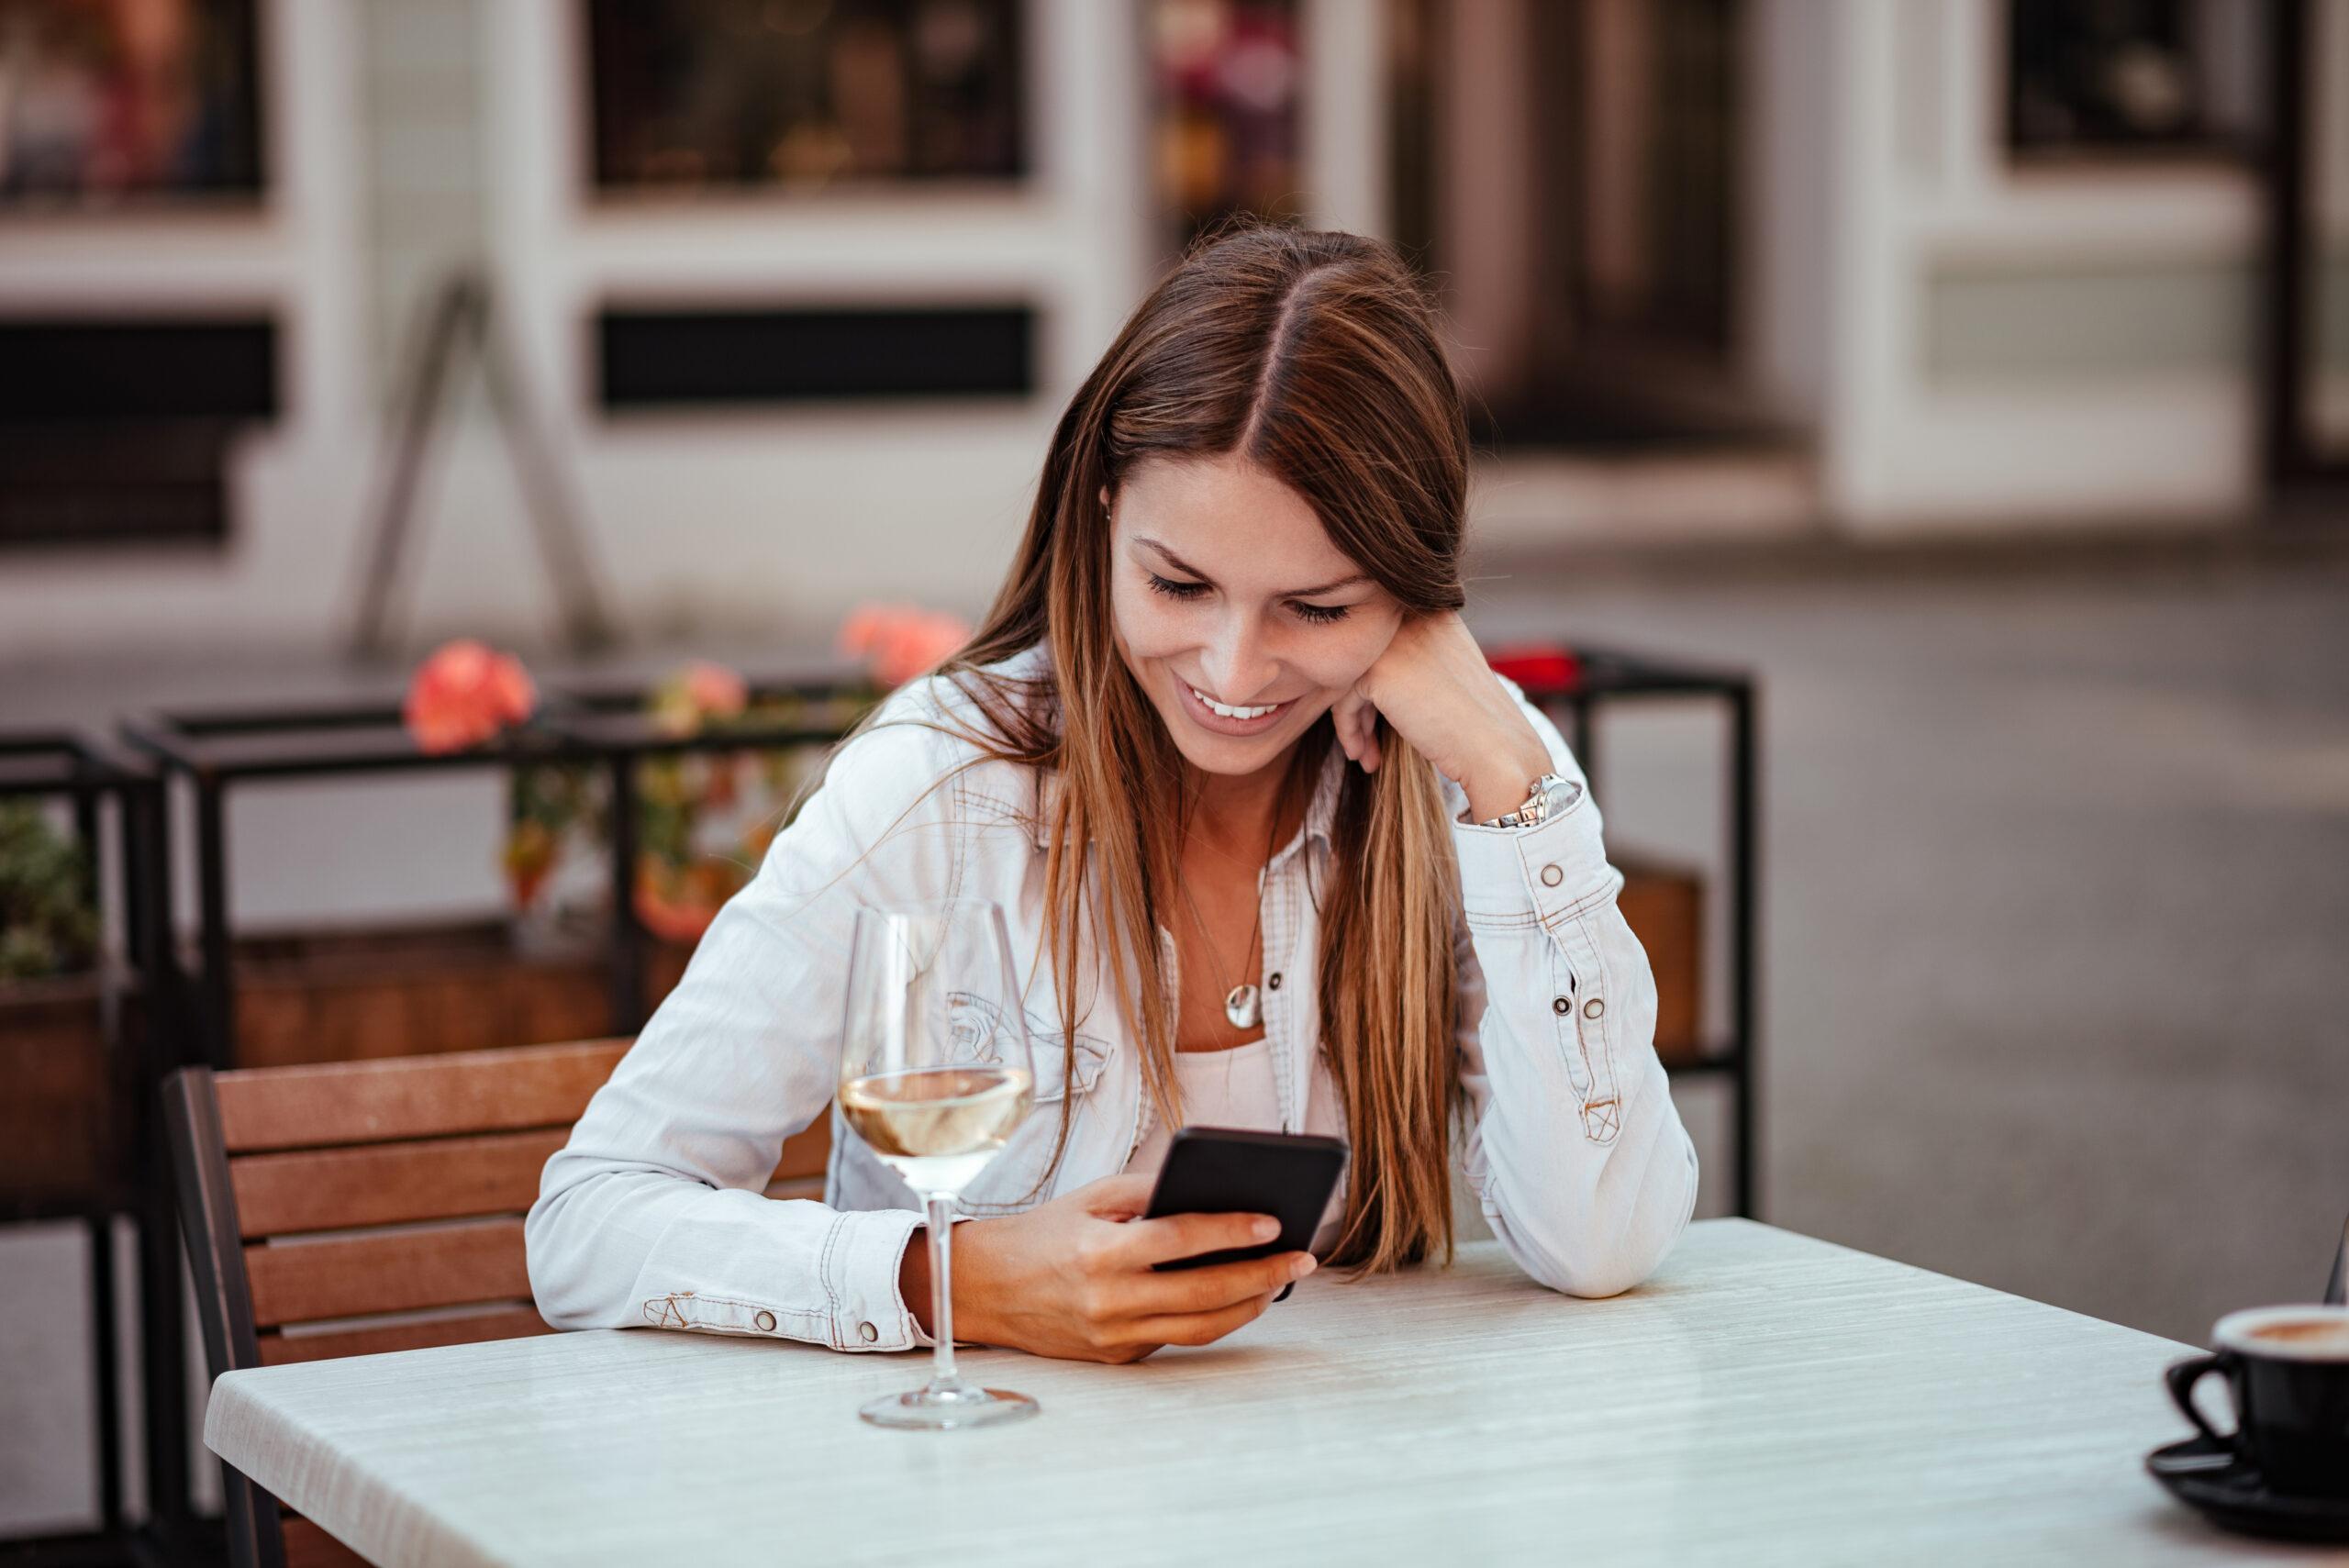 Young woman smiling with phone at restaurant because she figured out how to cancel sent follow request on Instagram before the other user found out.